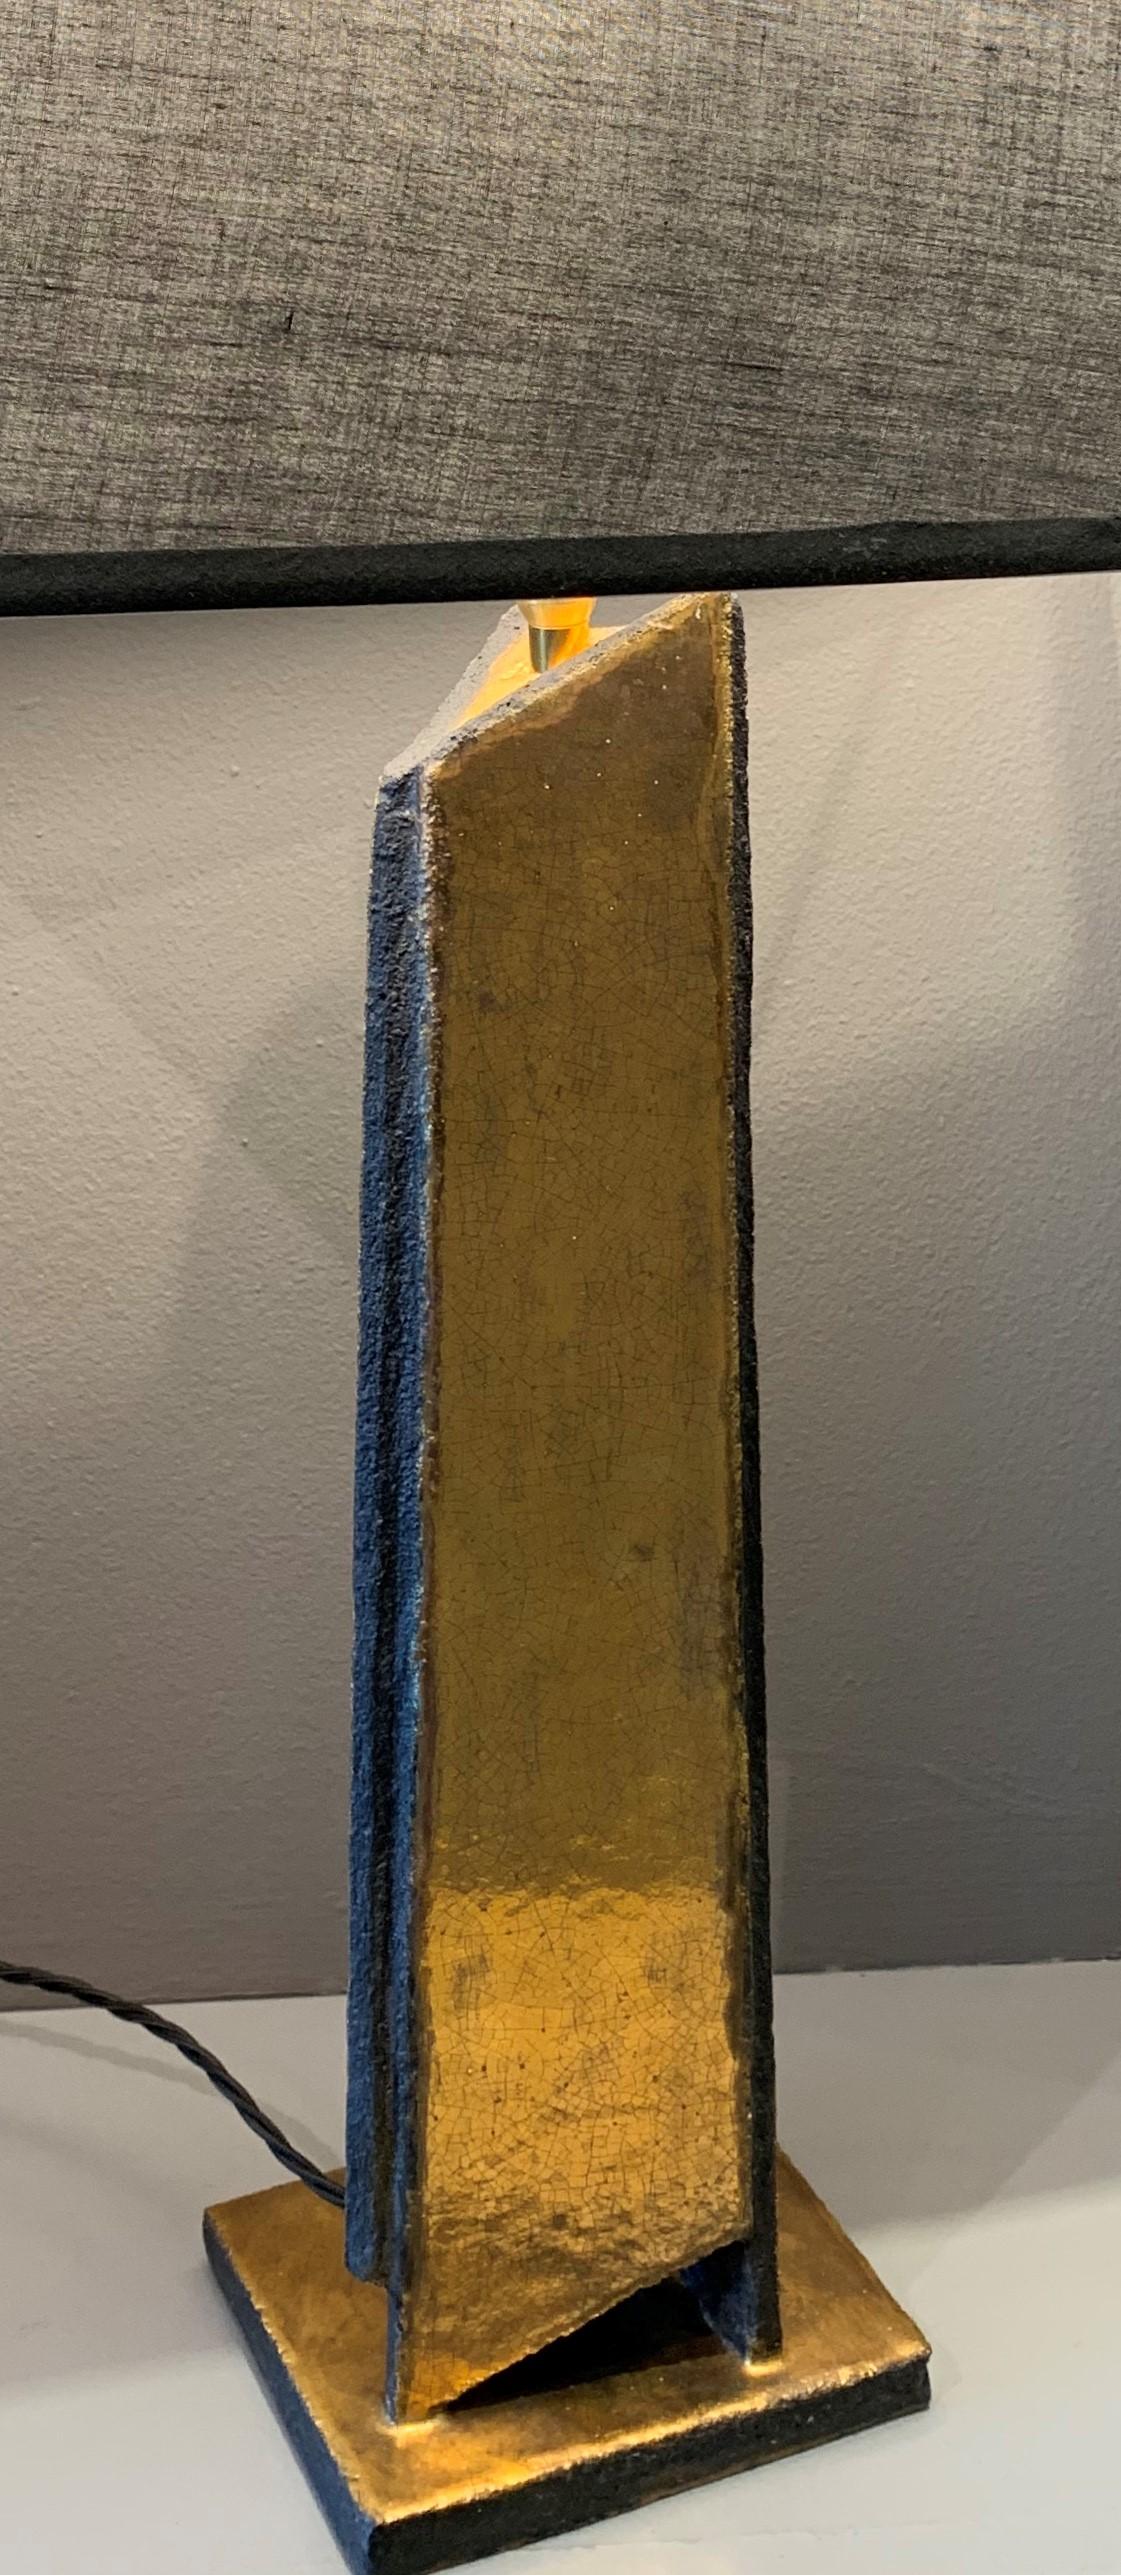 British Pair of Shard Lamps by Sotis Filippides Ceramic and 24-Carat Gold, 21st Century For Sale